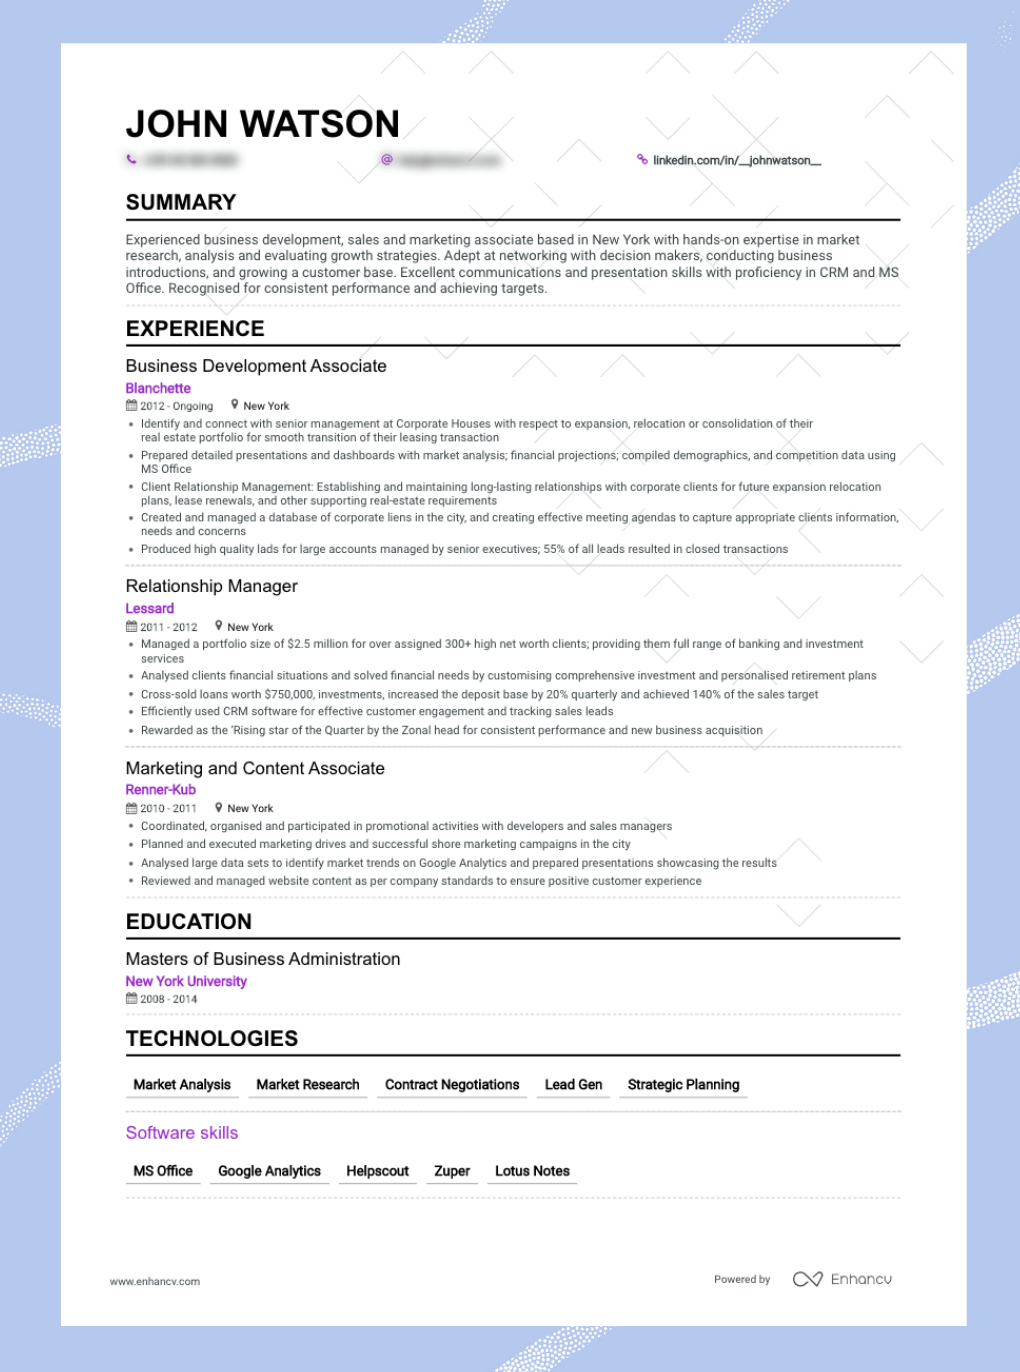 Enhancv The Best Resume Formats You Need to Consider (5+ Examples Included) 